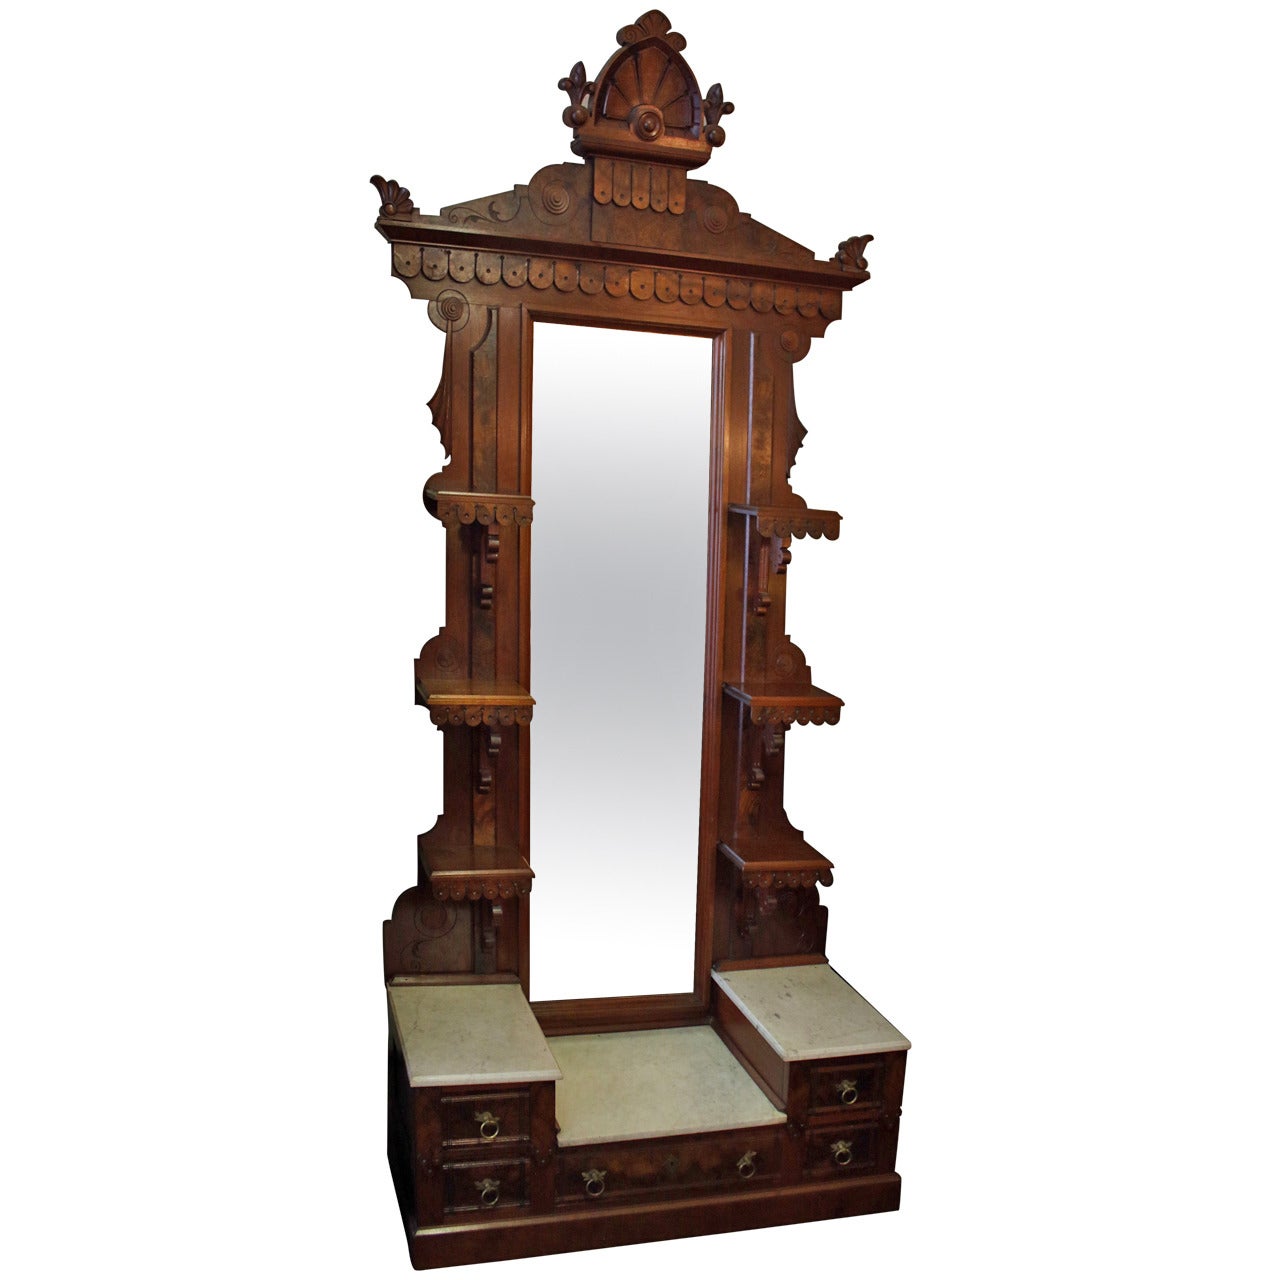 19th century Victorian Burled Walnut Étagère with Mirror